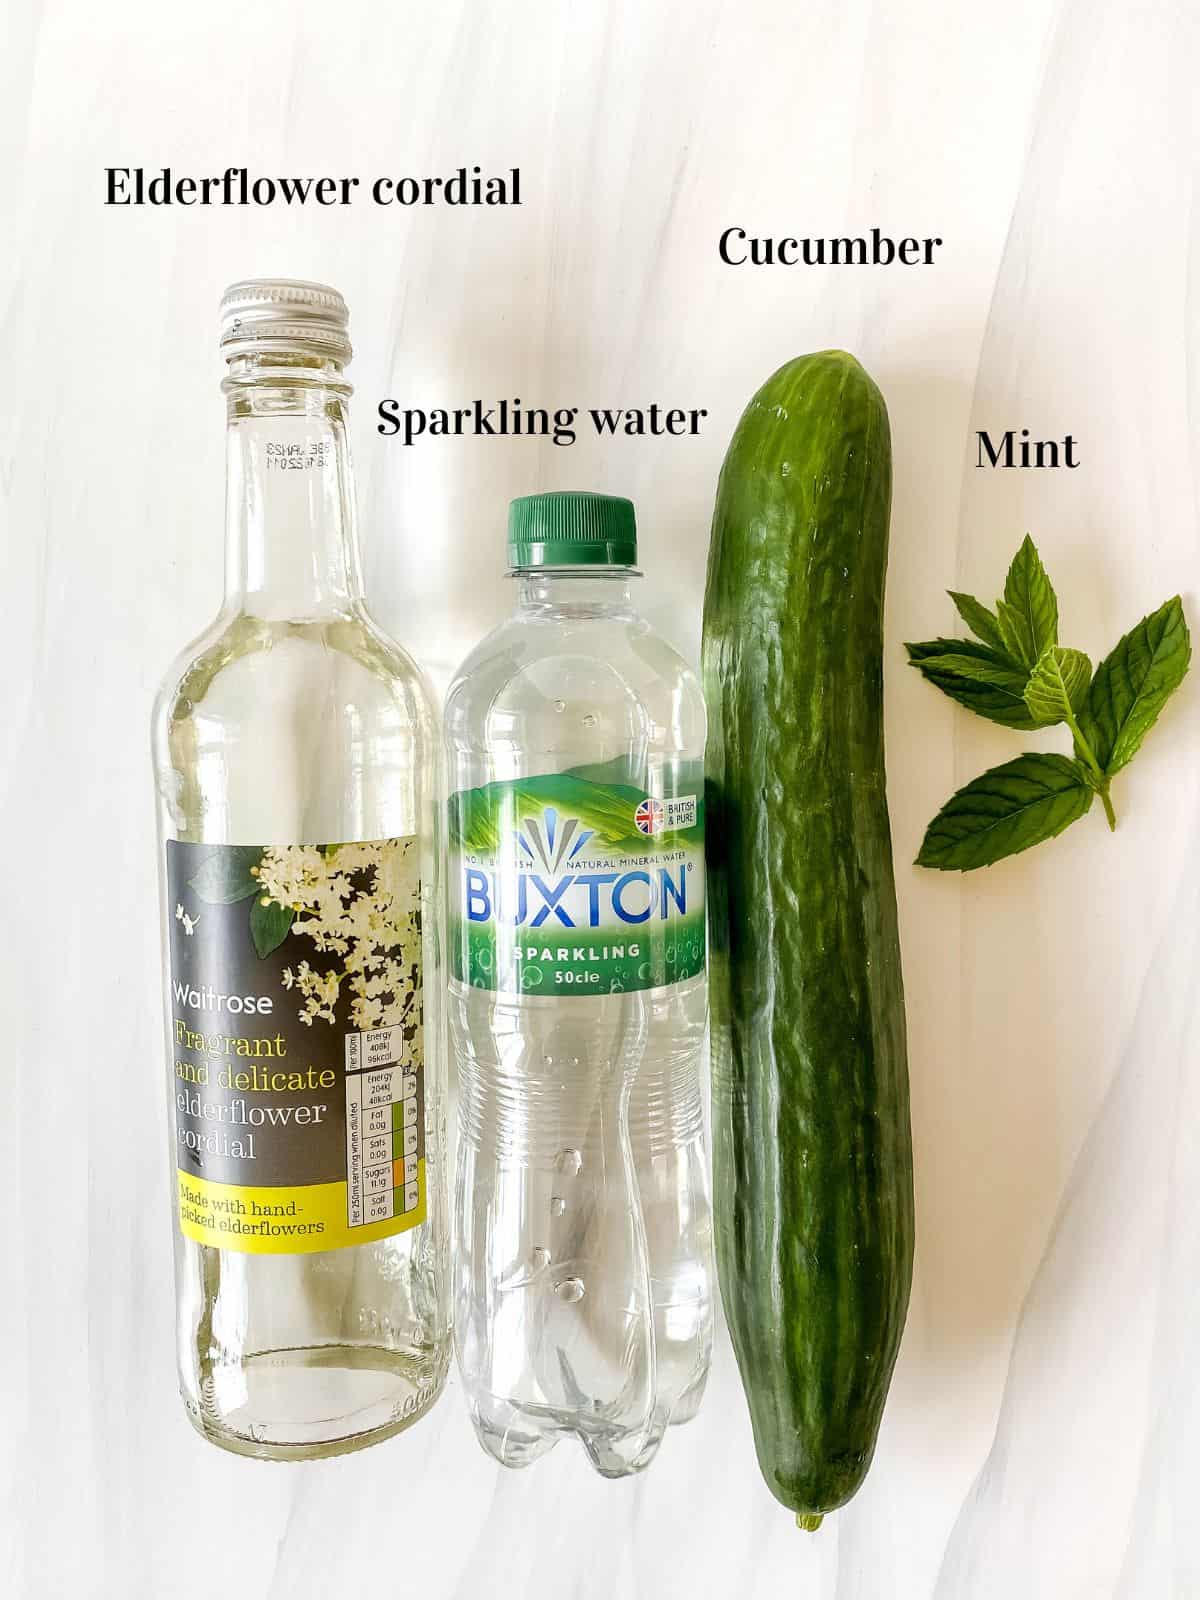 labelled picture of elderflower cordial, sparkling water, cucumber and mint.